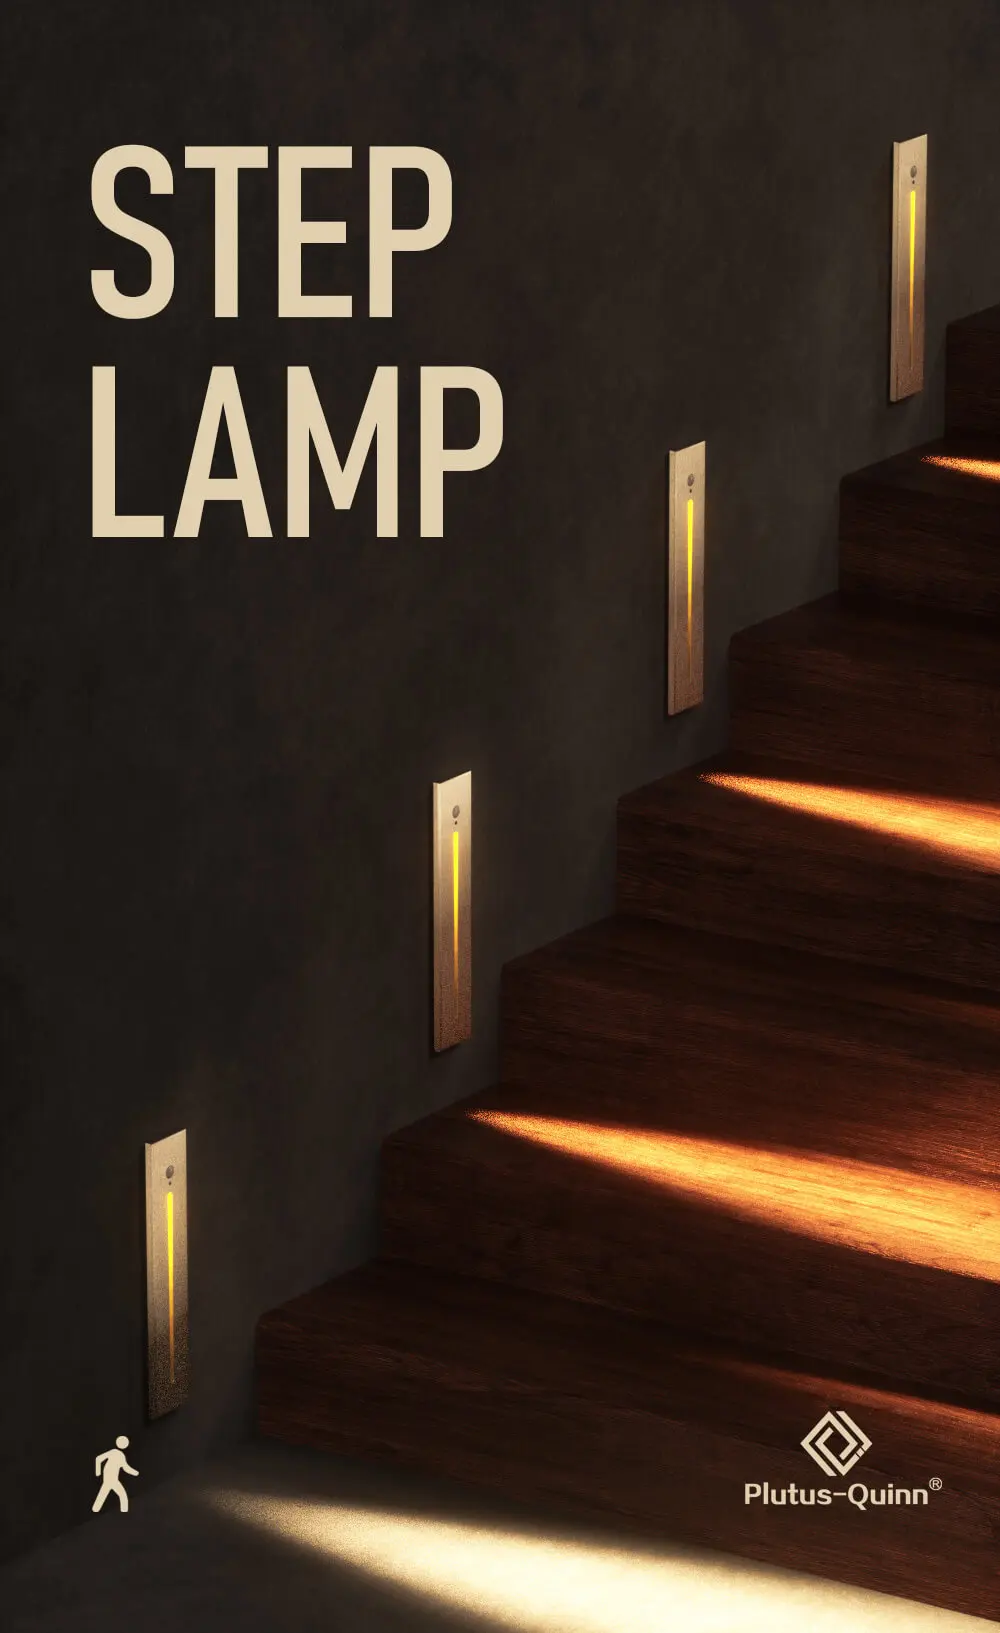 plug in wall lamp LED Sconce Indoor Motion Sensor Wall Lamp Outdoor Waterproof Step Lights Aluminum Vertical Stair Lamp Decor for Home Stairways gold wall lights